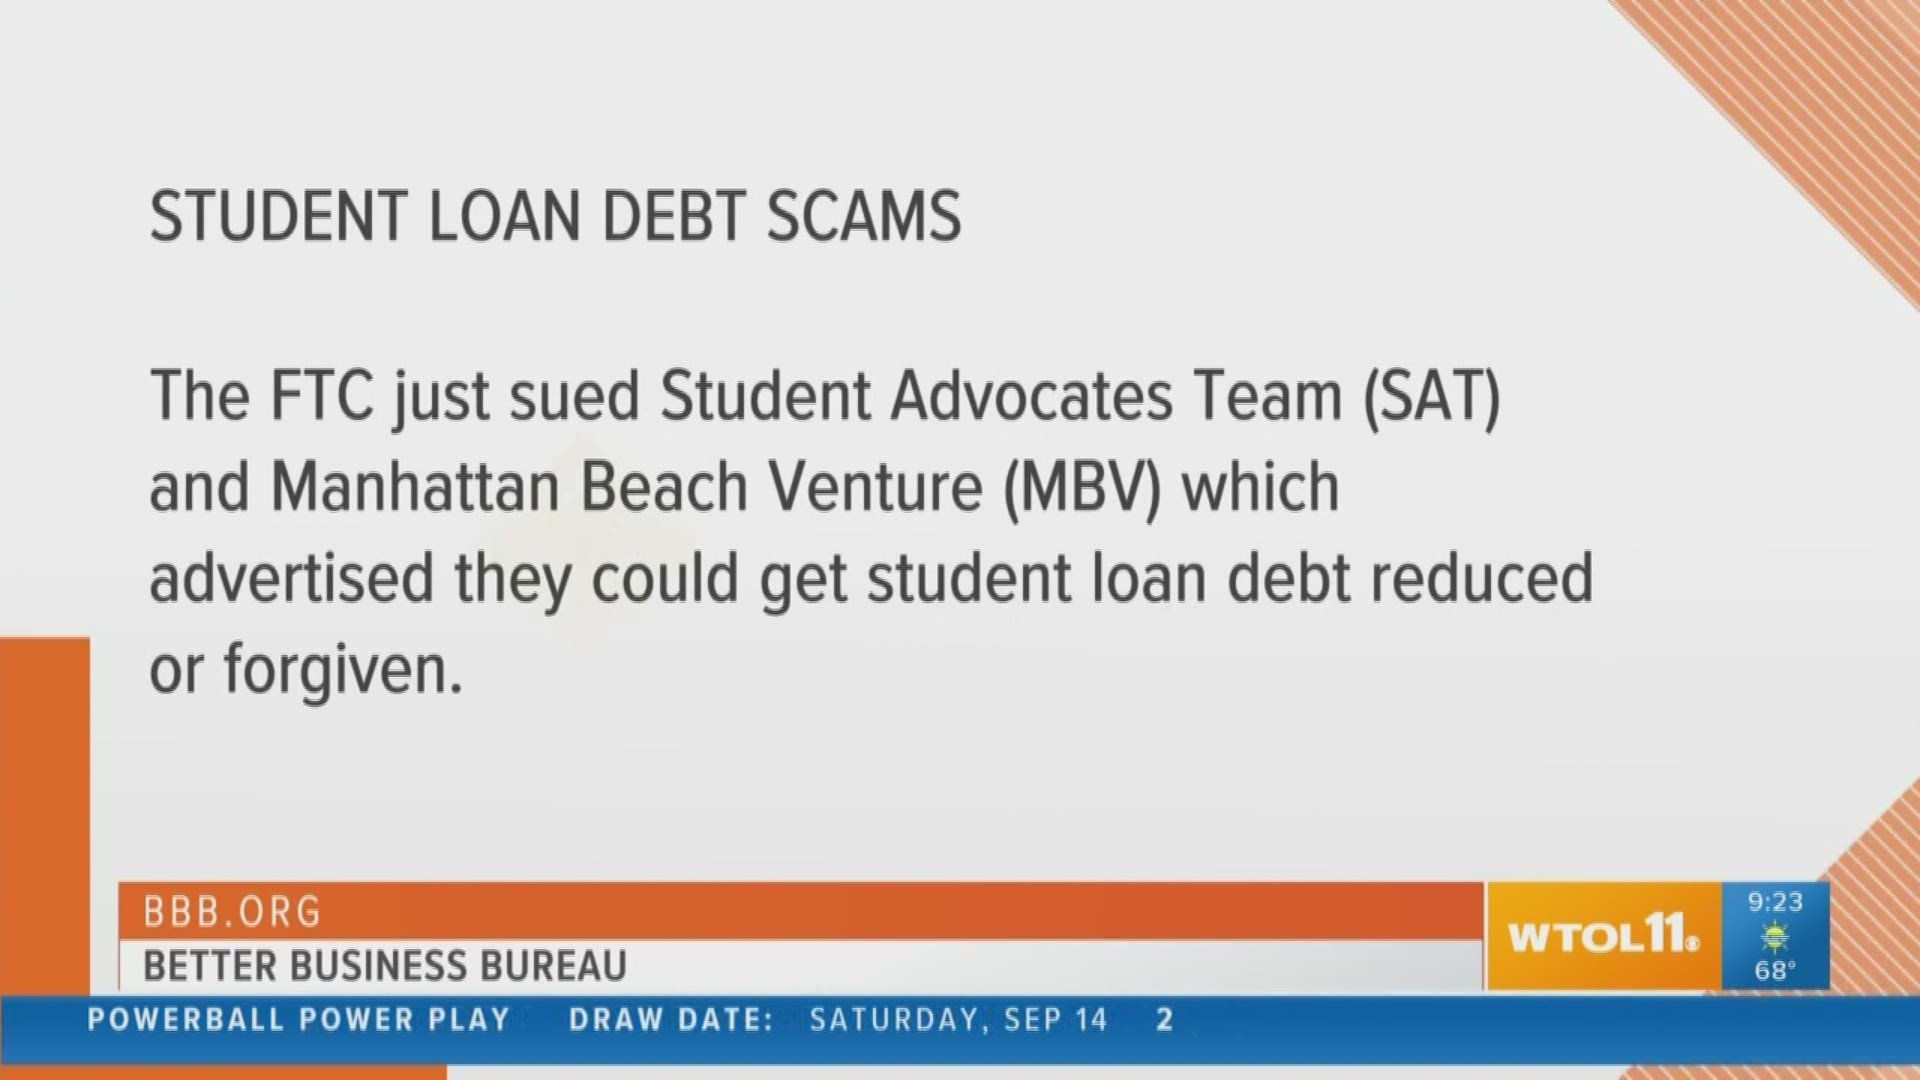 Many people struggle with paying off their student loans. The Better Business Bureau advises you to watch out for scammers trying to take advantage of all your money just waiting to be collected.